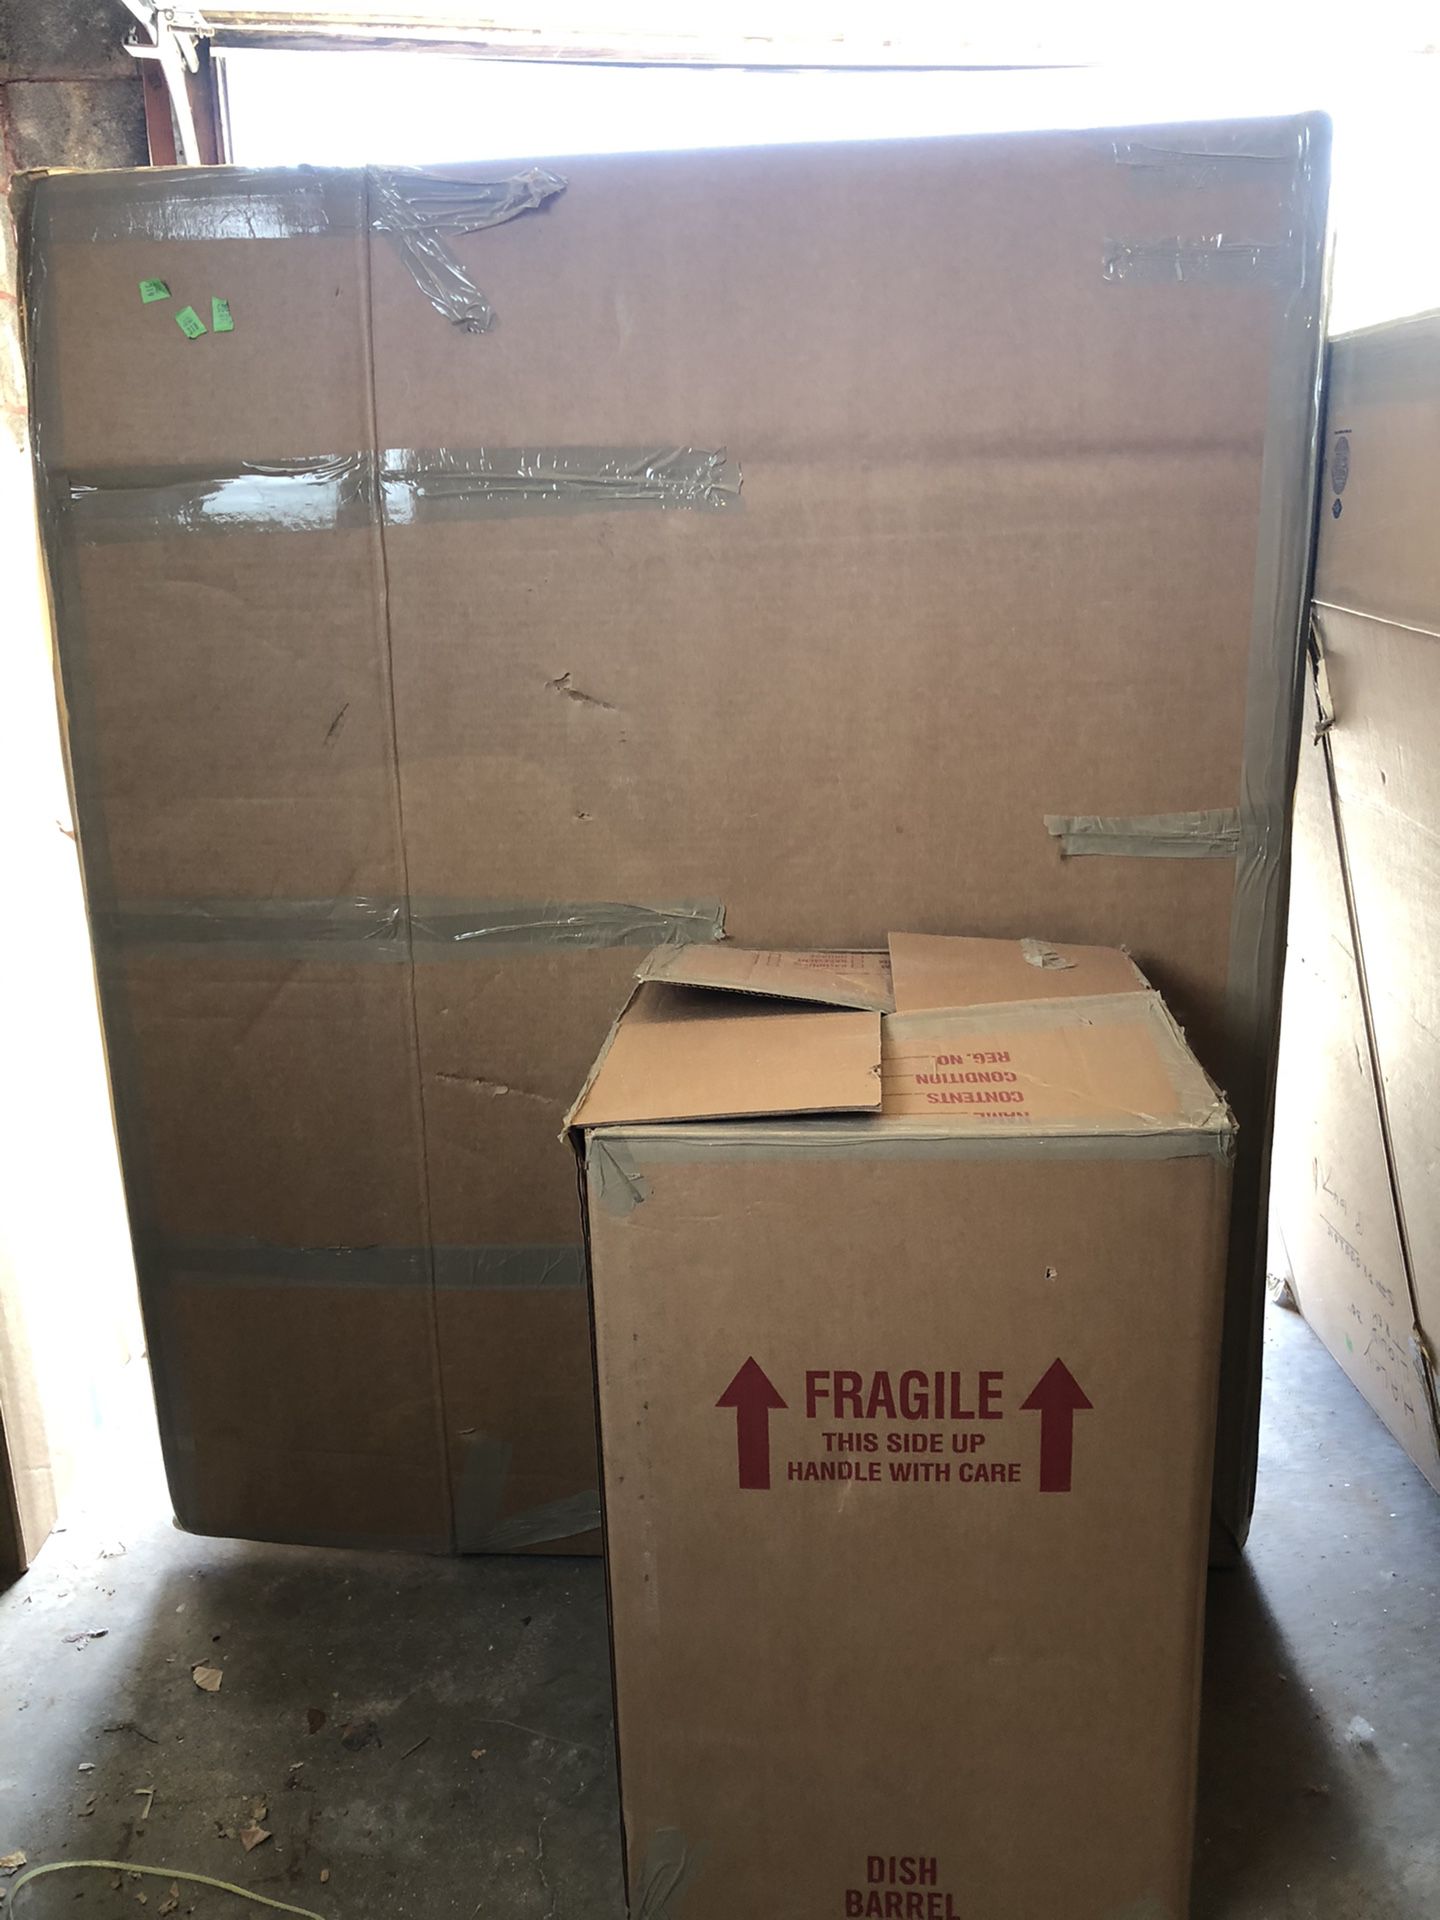 Free moving/storage packing paper in large bike box. No other boxes.